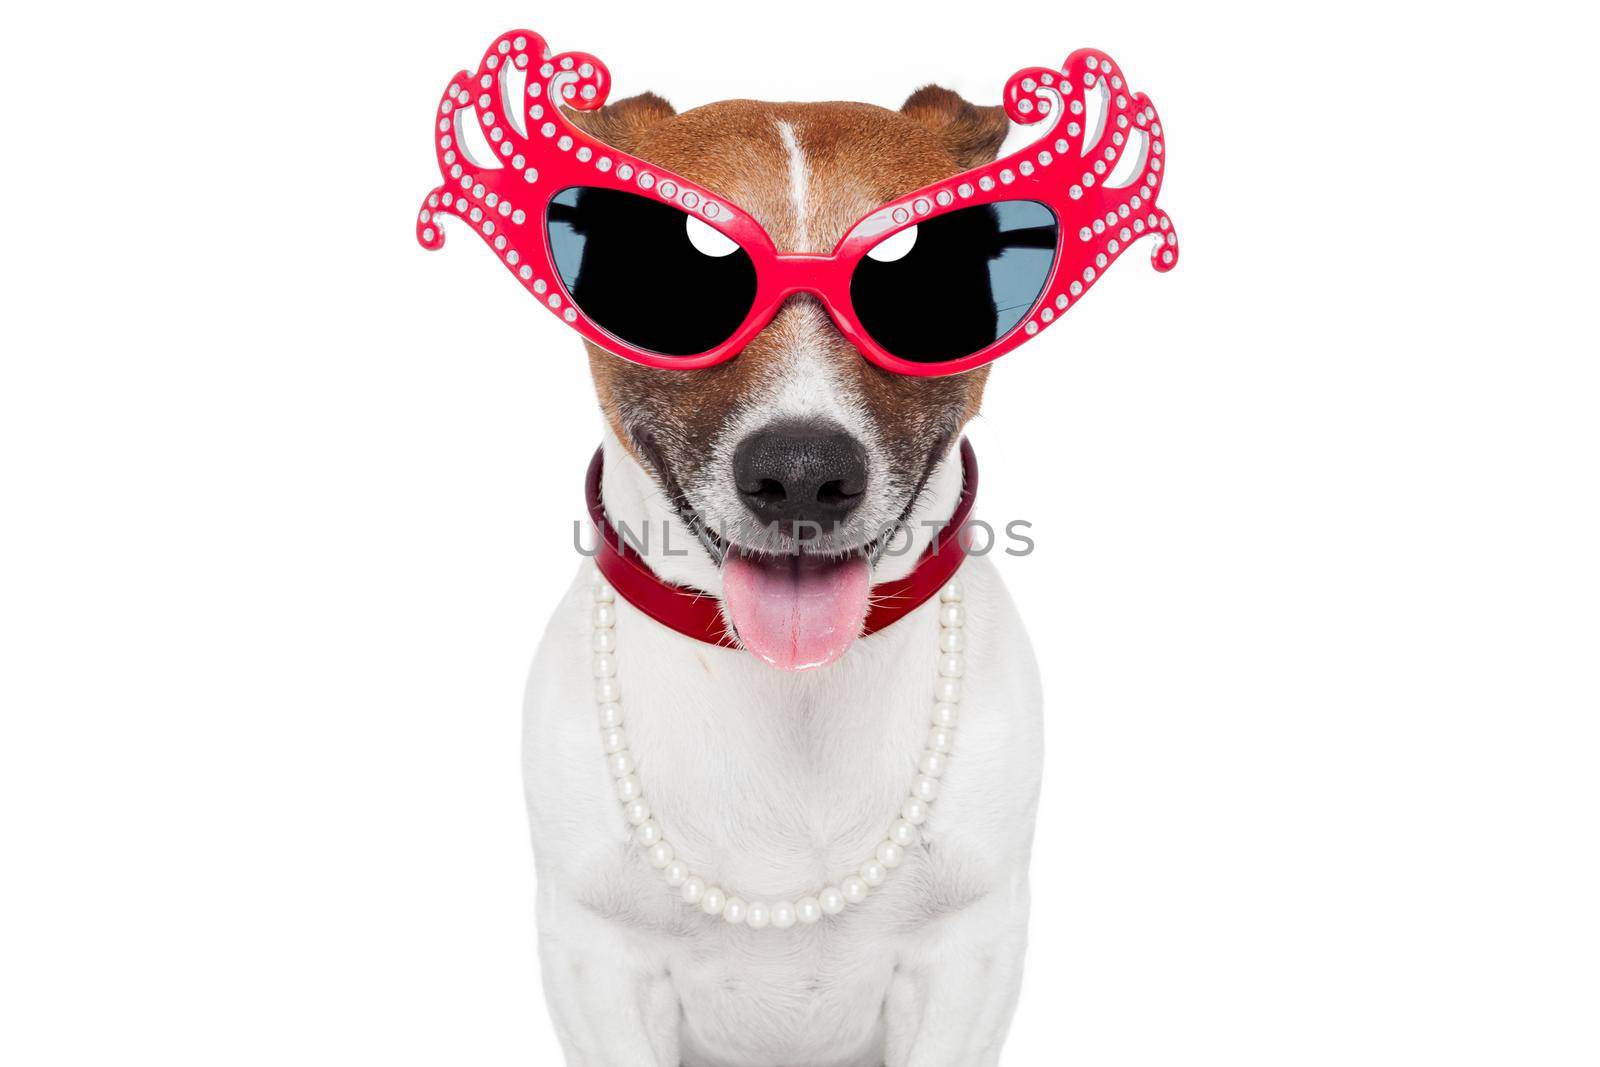 gay dog with funny shades by Brosch